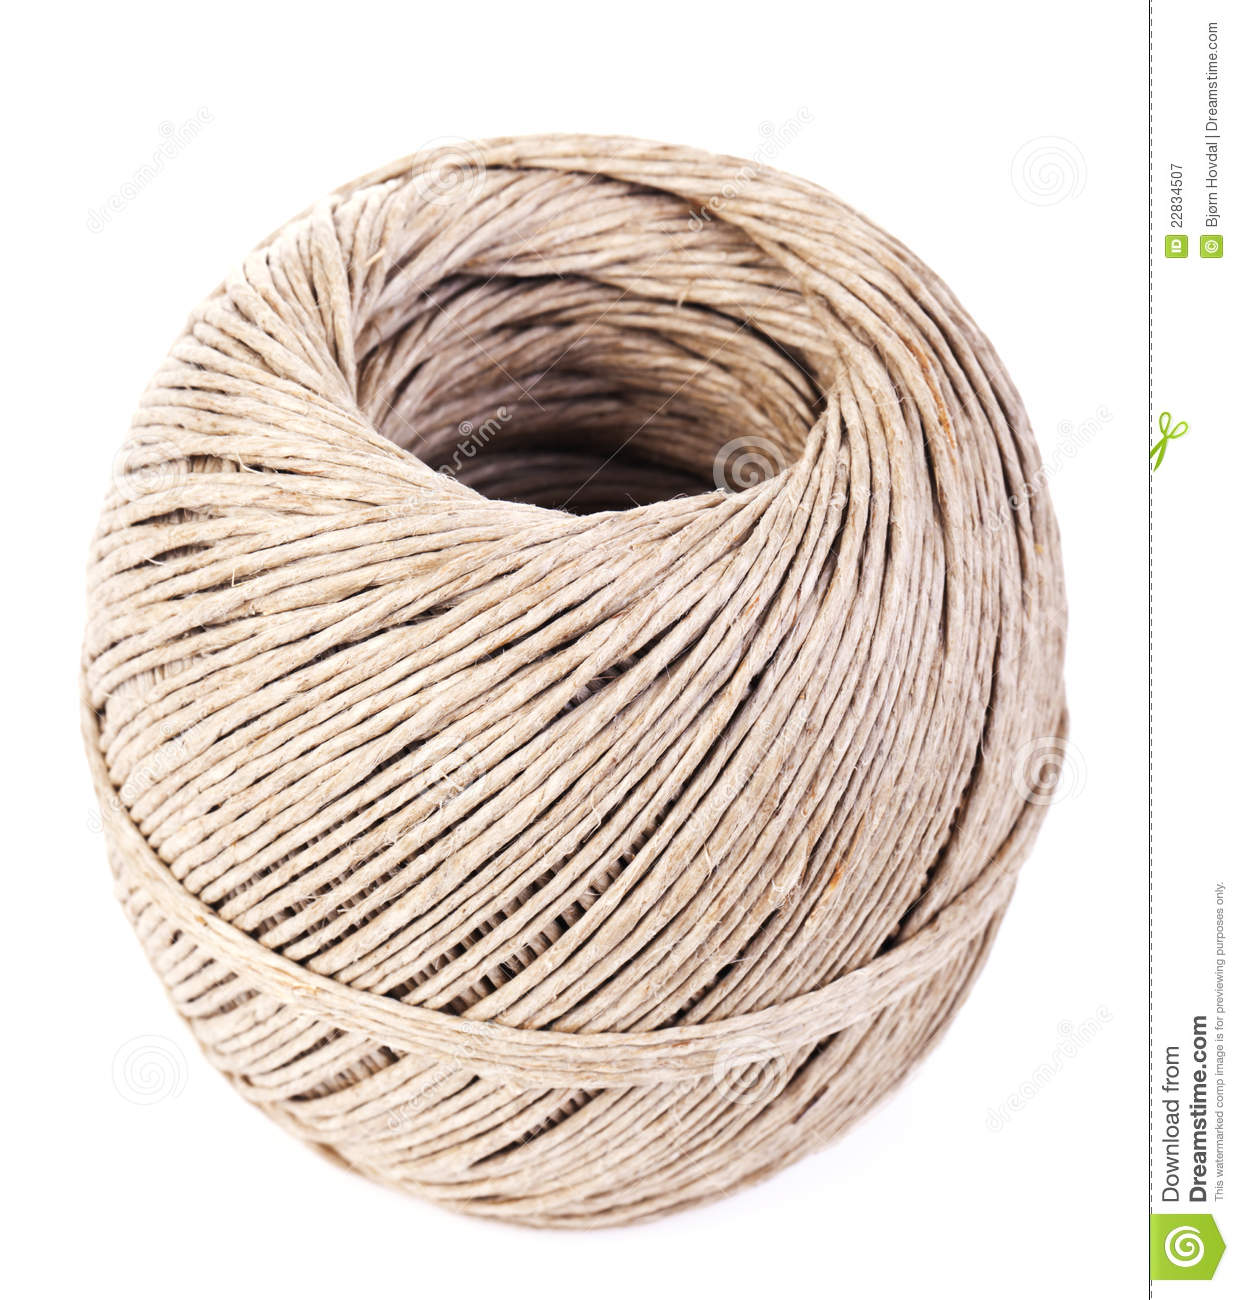 Ball Of String Royalty Free Stock Photography   Image  22834507